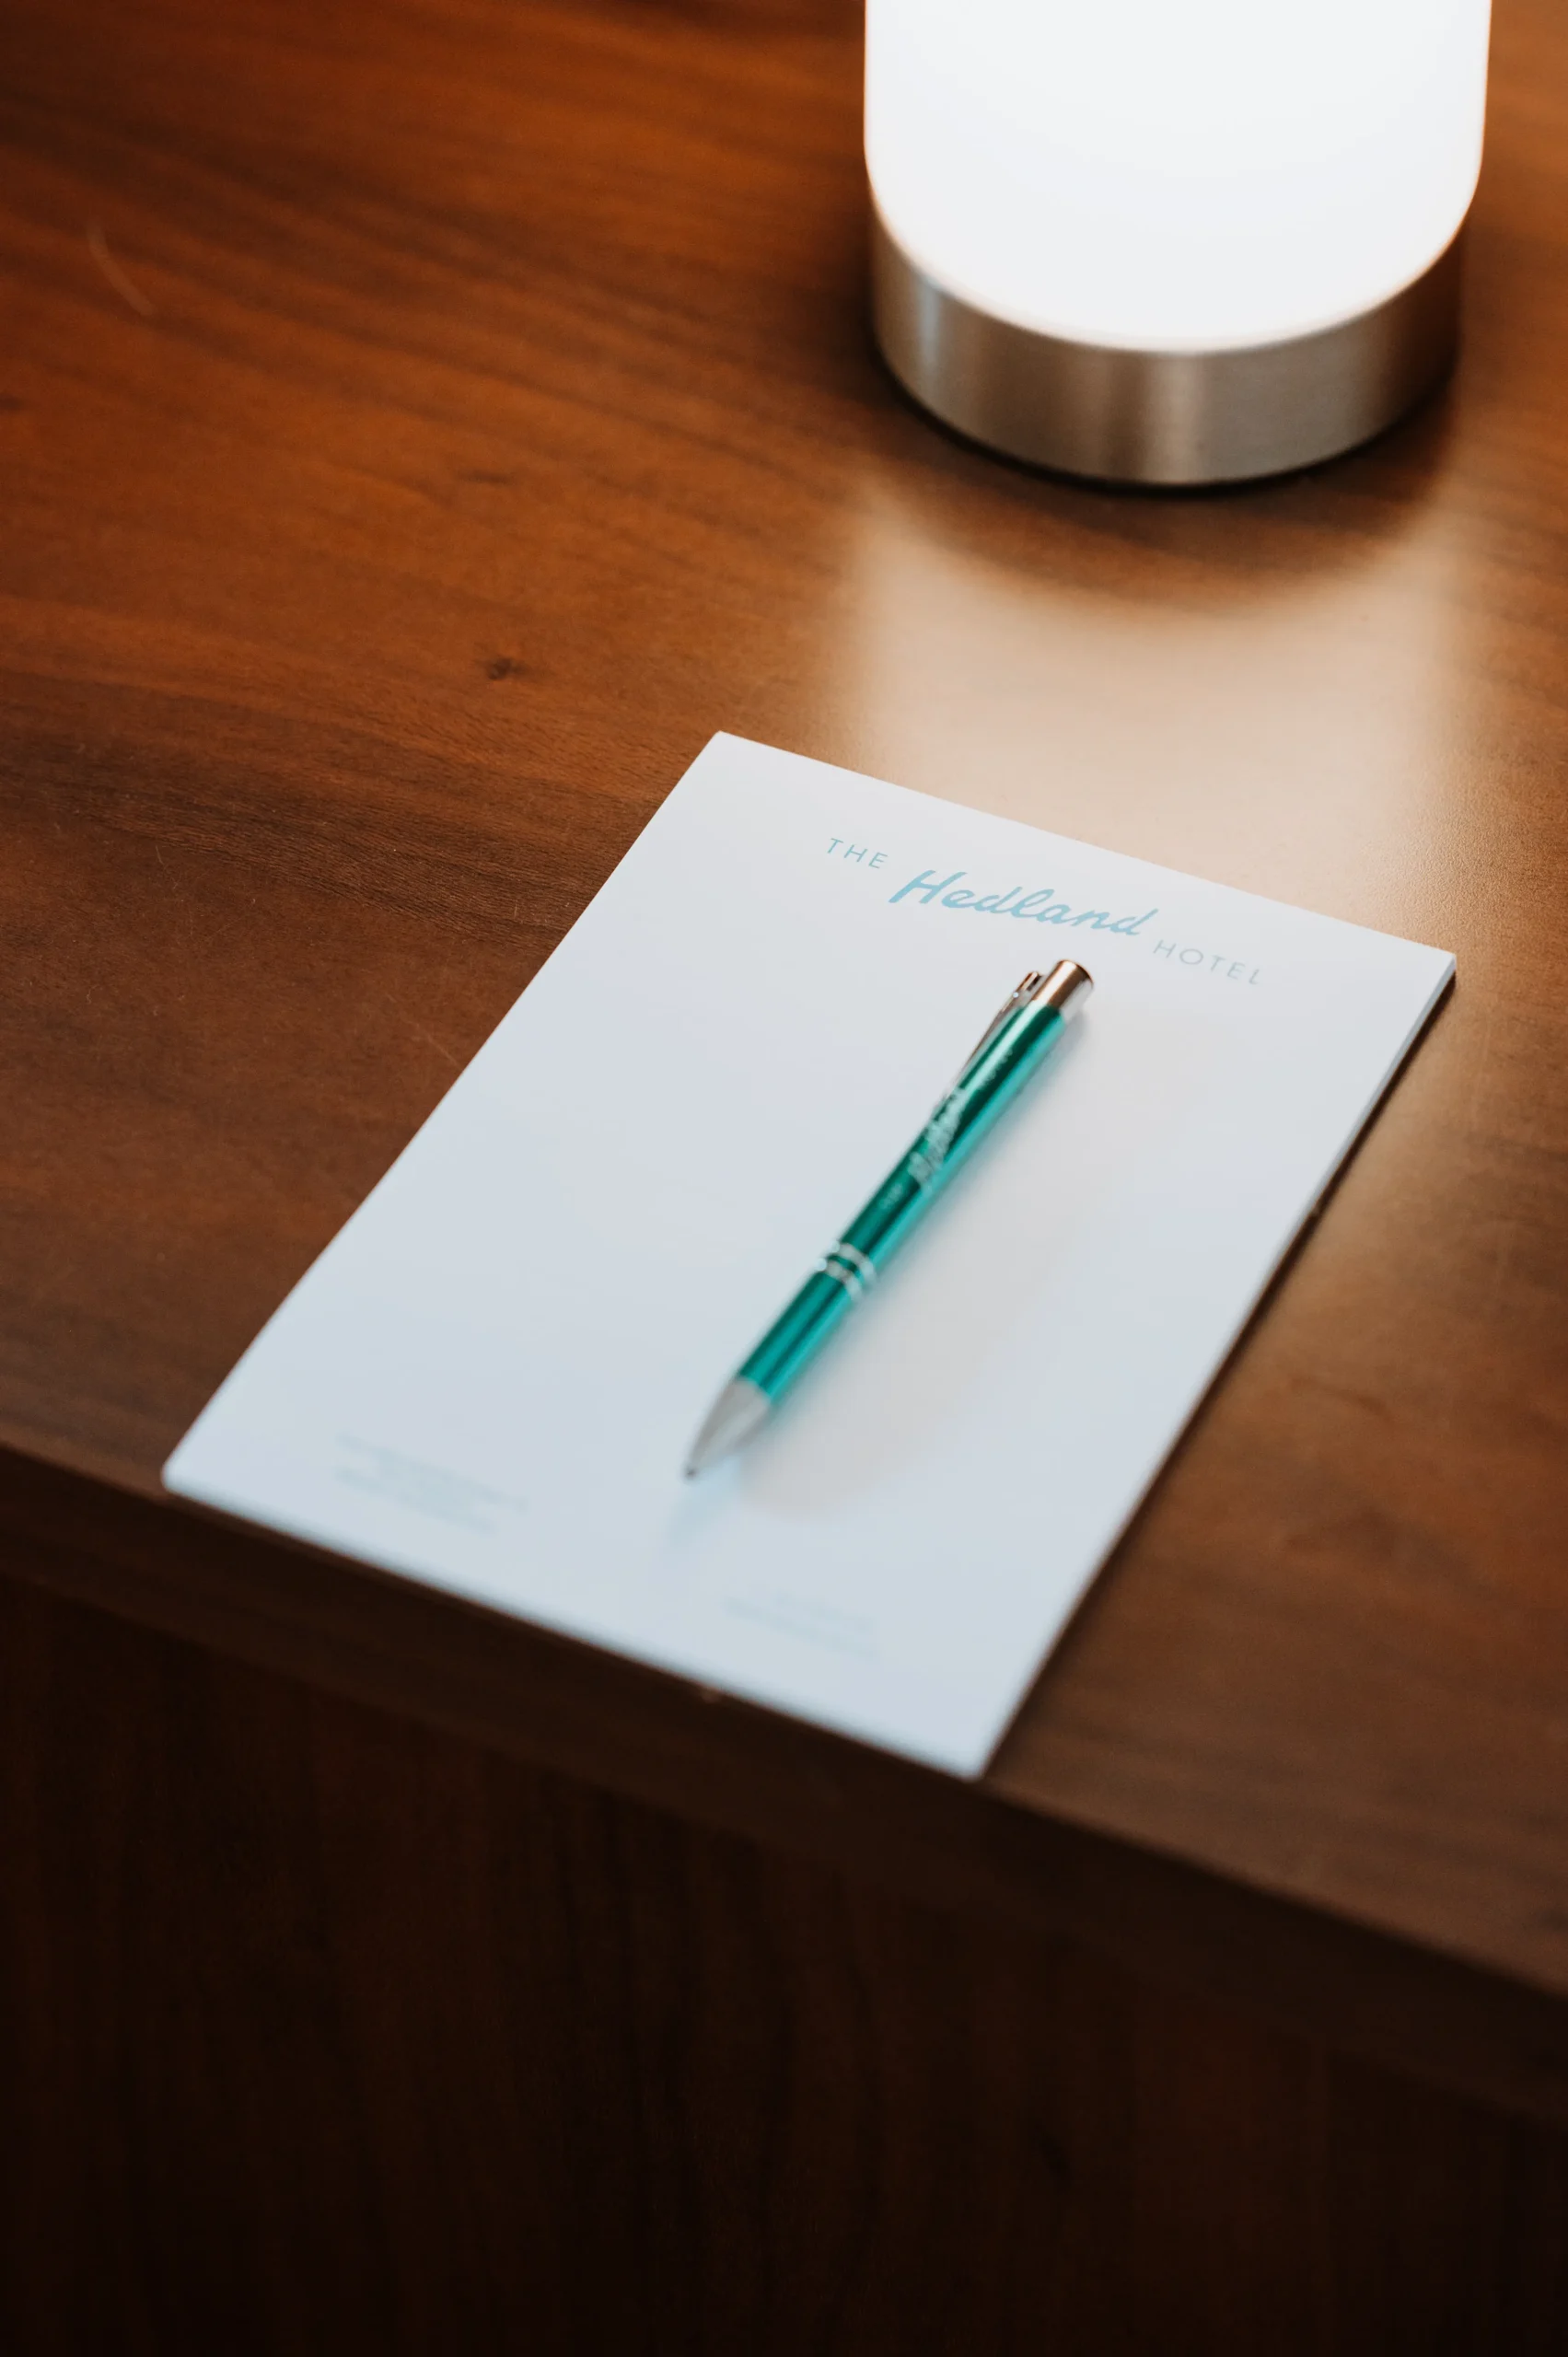 a close up of a pen and paper with The Hedland Hotel logo on the bedside table